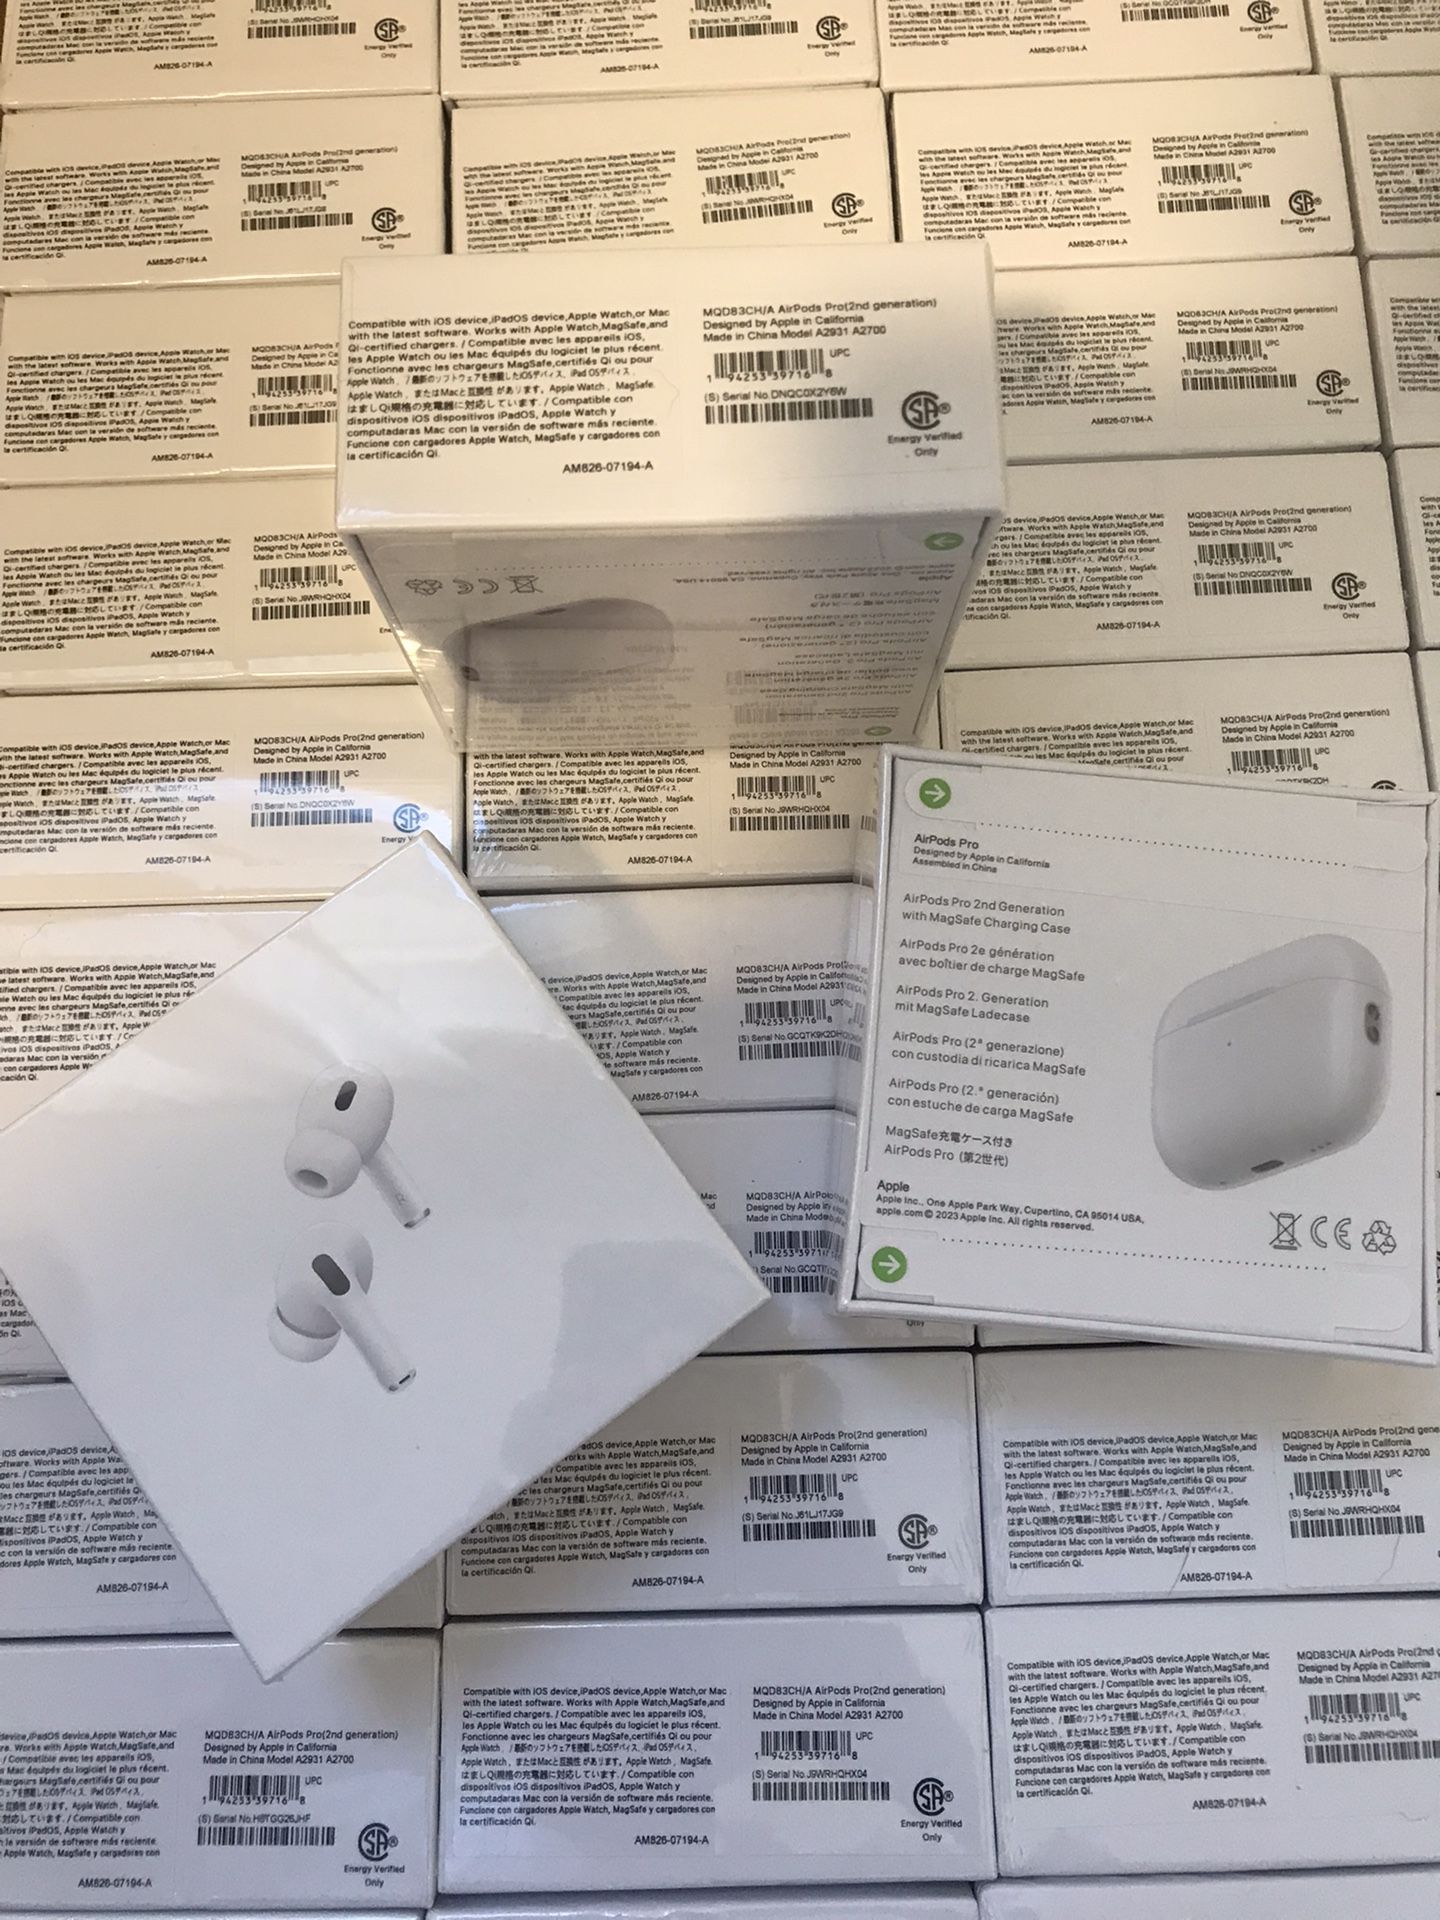 AirPod Pros (5 For $150)